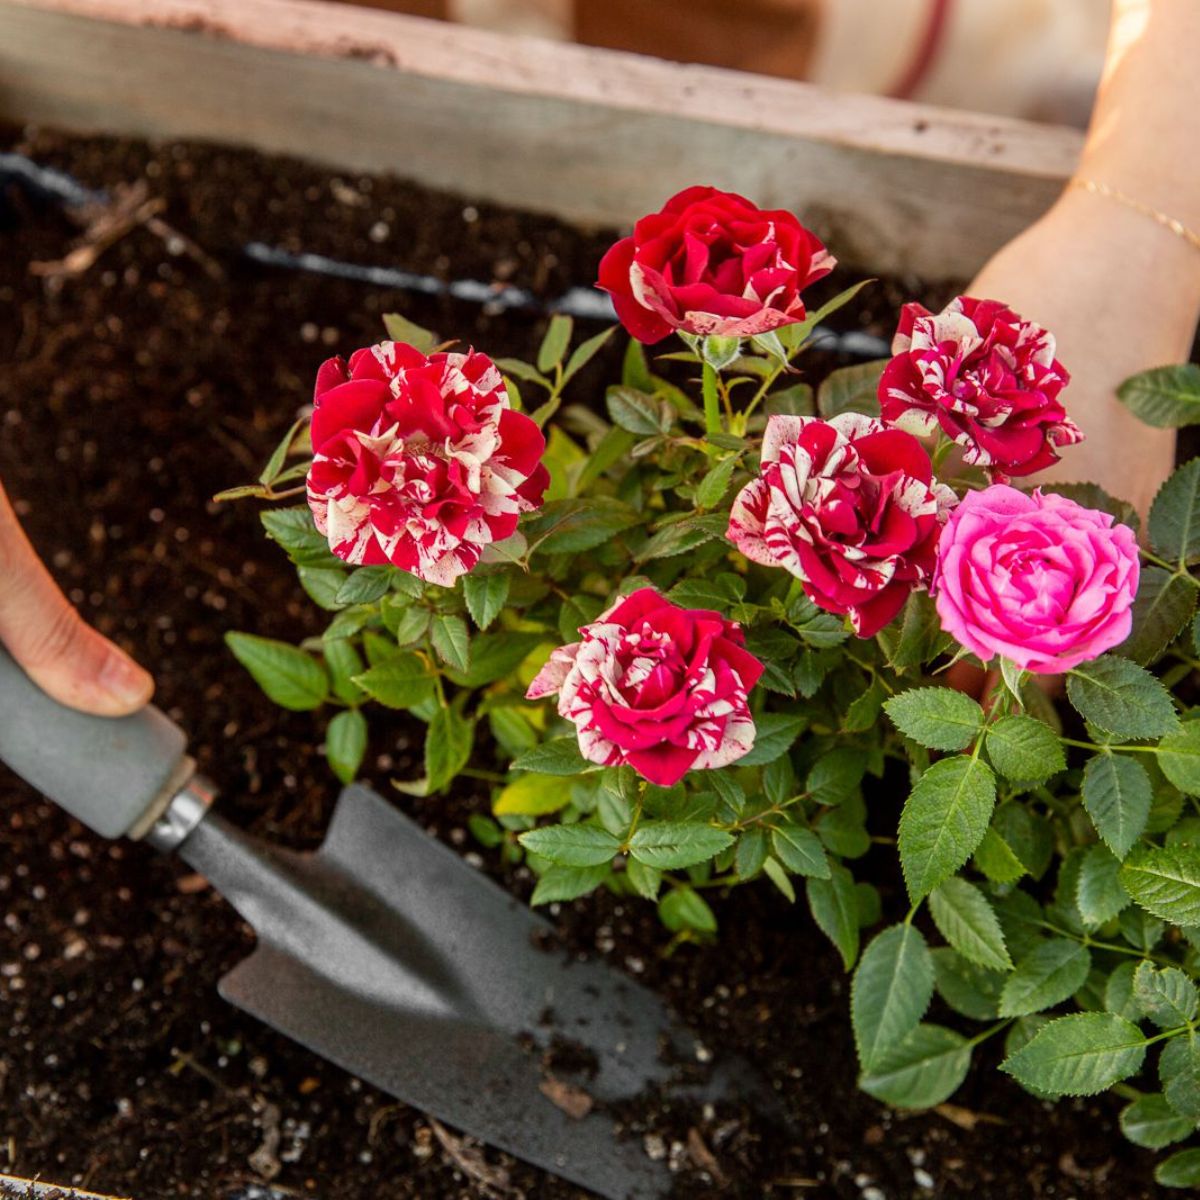 Skipping soil amendments is one of the mistakes preventing your roses from blooming on Thursd